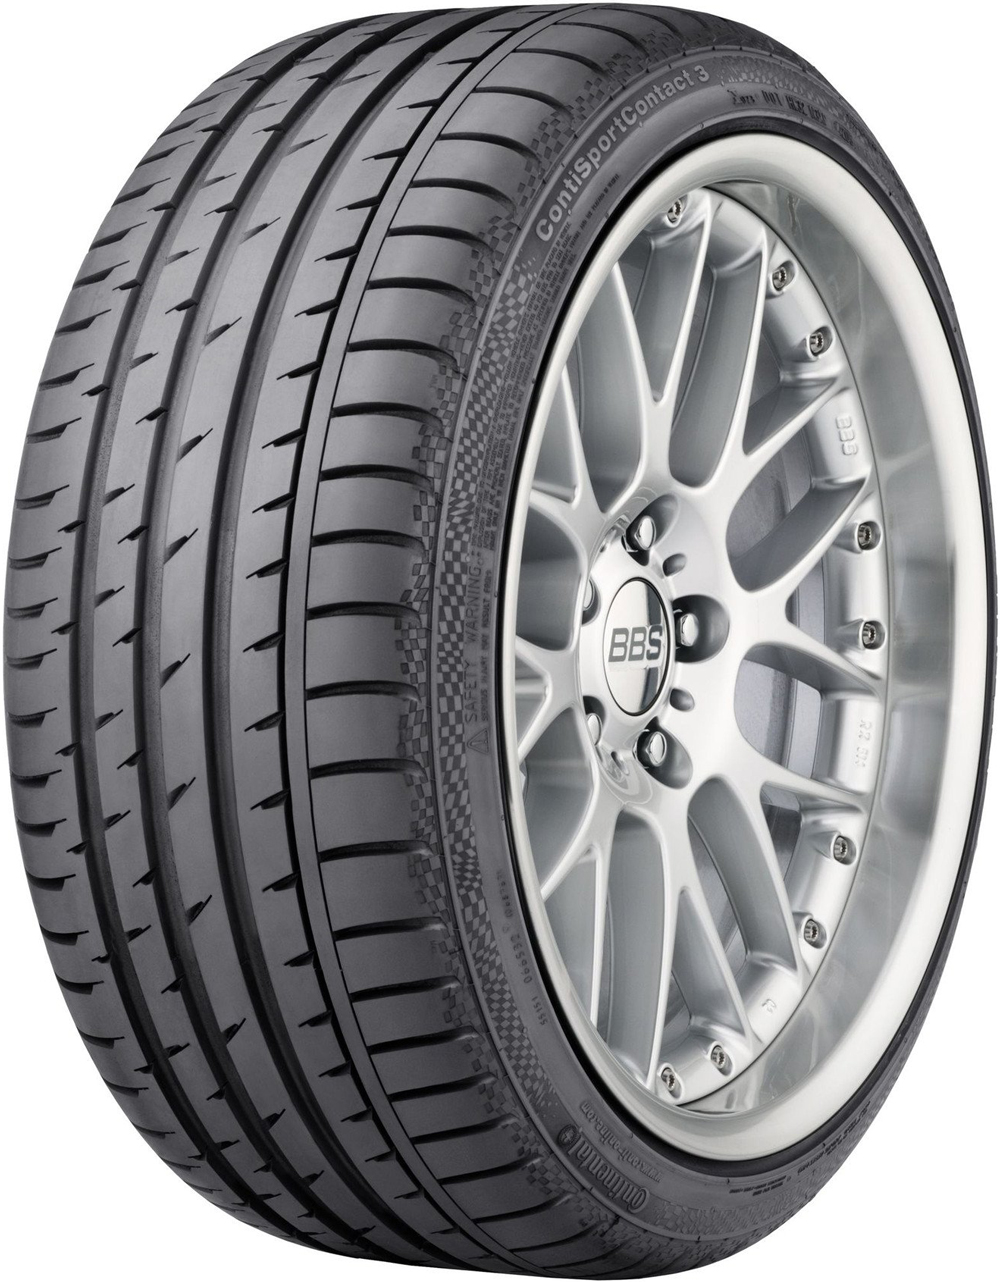 Anvelope auto CONTINENTAL SC-3 MO MERCEDES FP 235/45 R17 94W